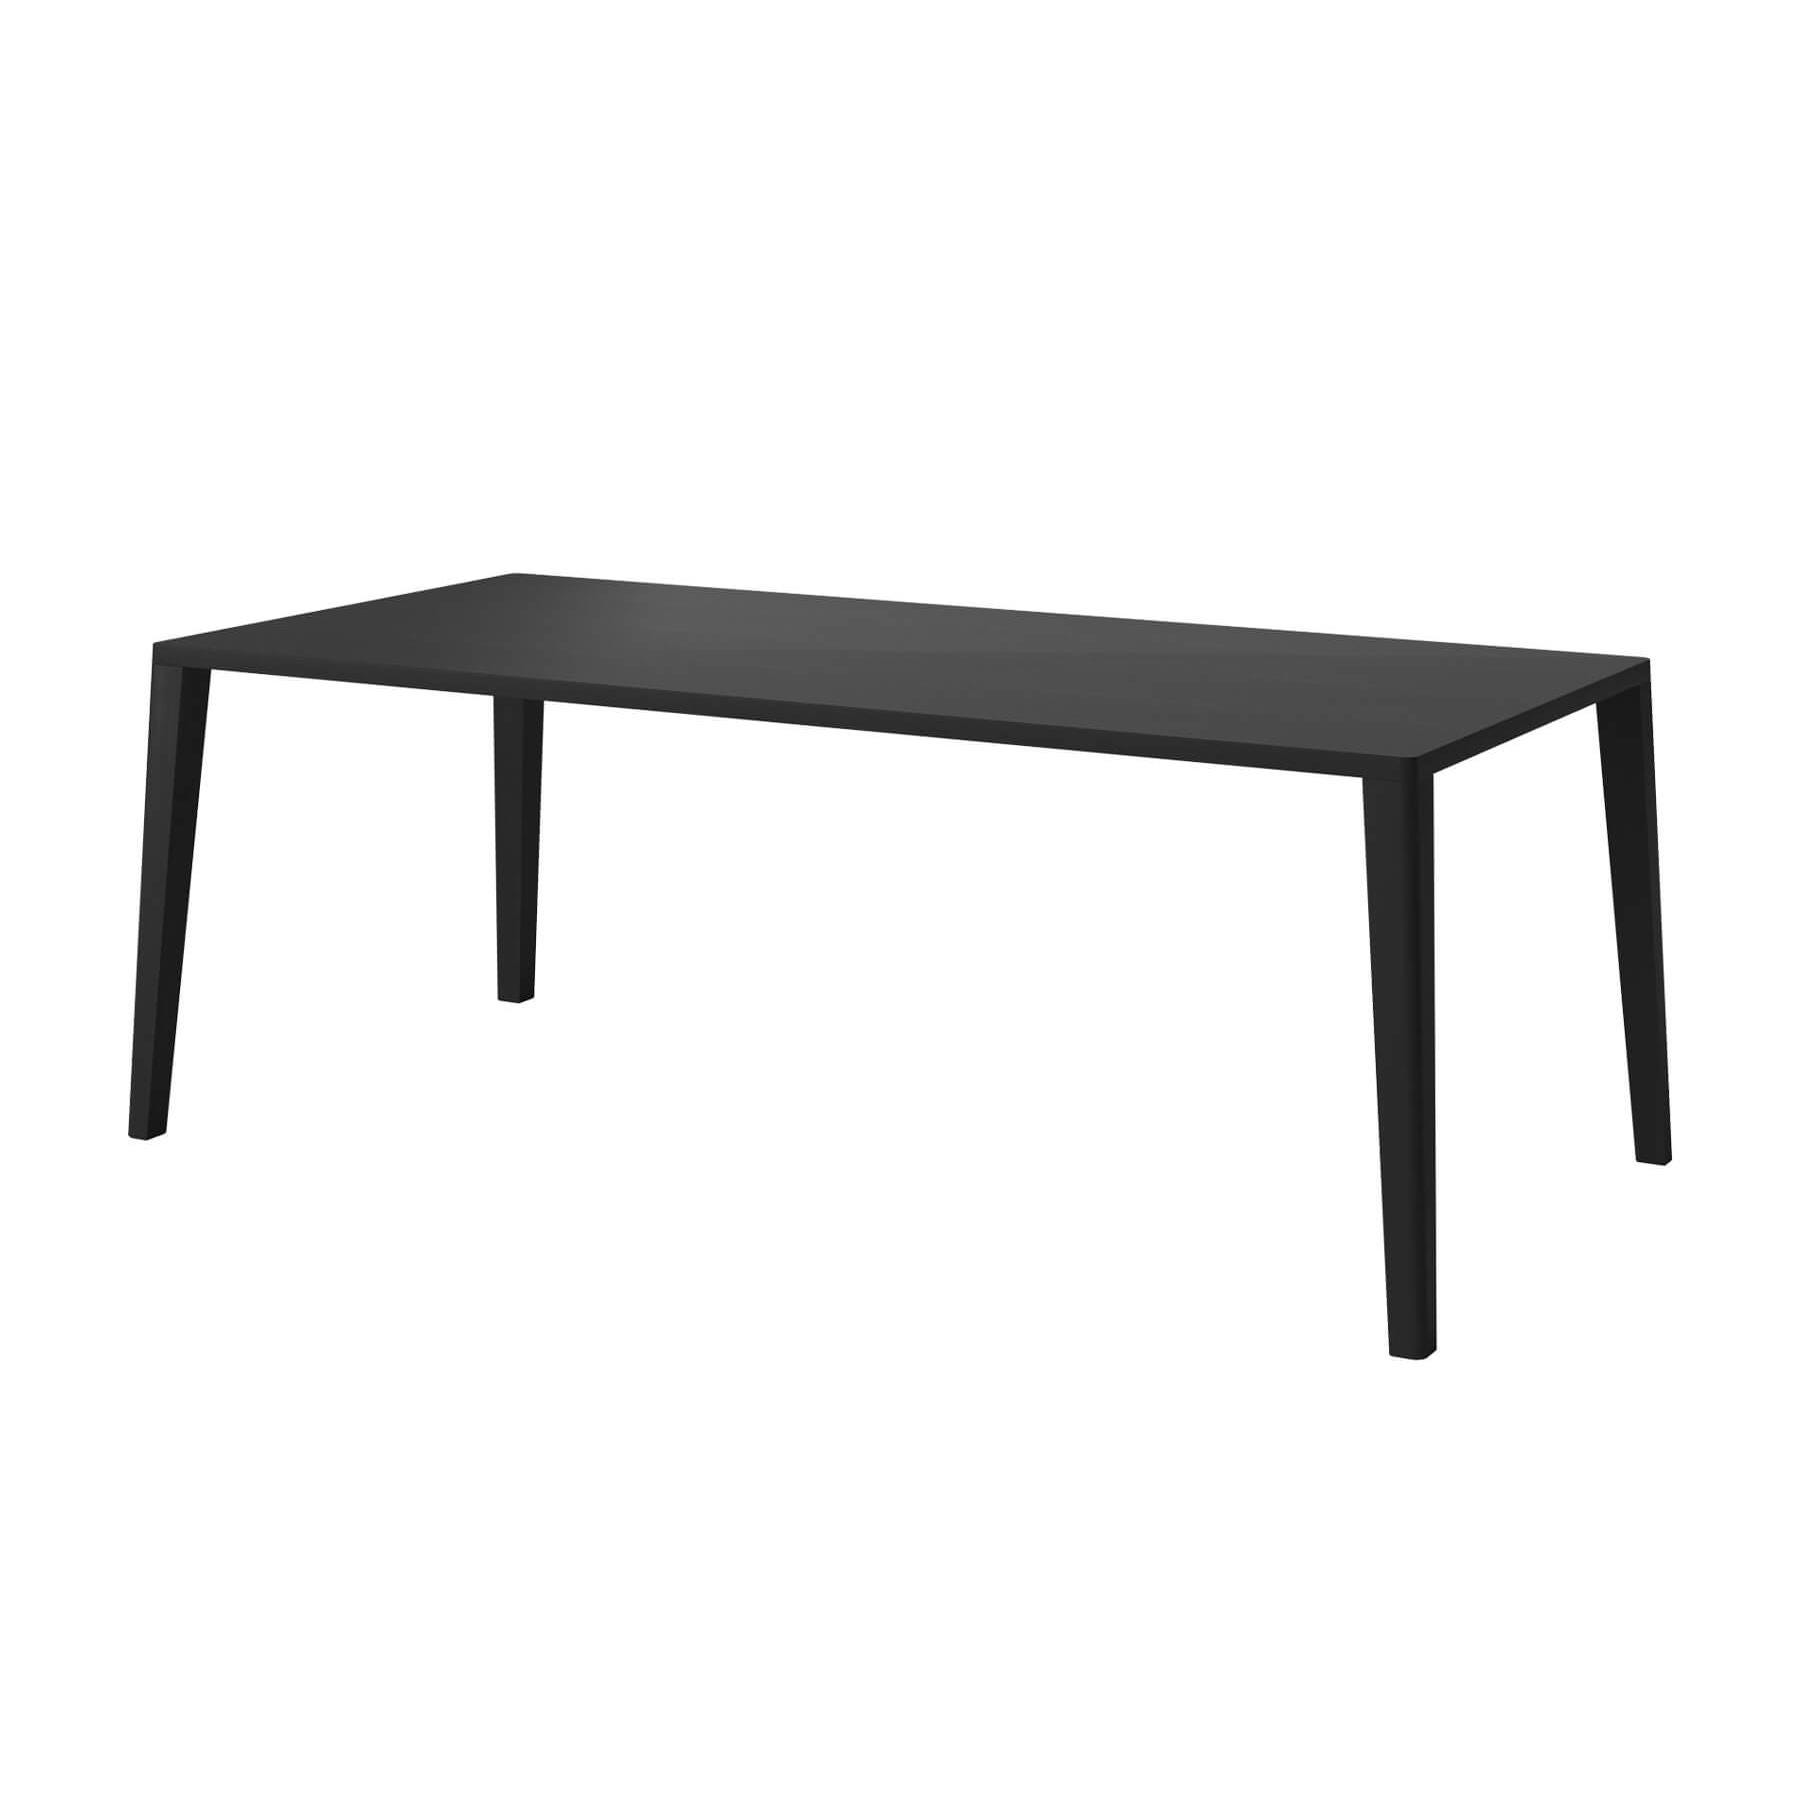 Bolia Graceful Dining Table 200 X 95cm Black Stained Legs Without Extension Leaves Designer Furniture From Holloways Of Ludlow